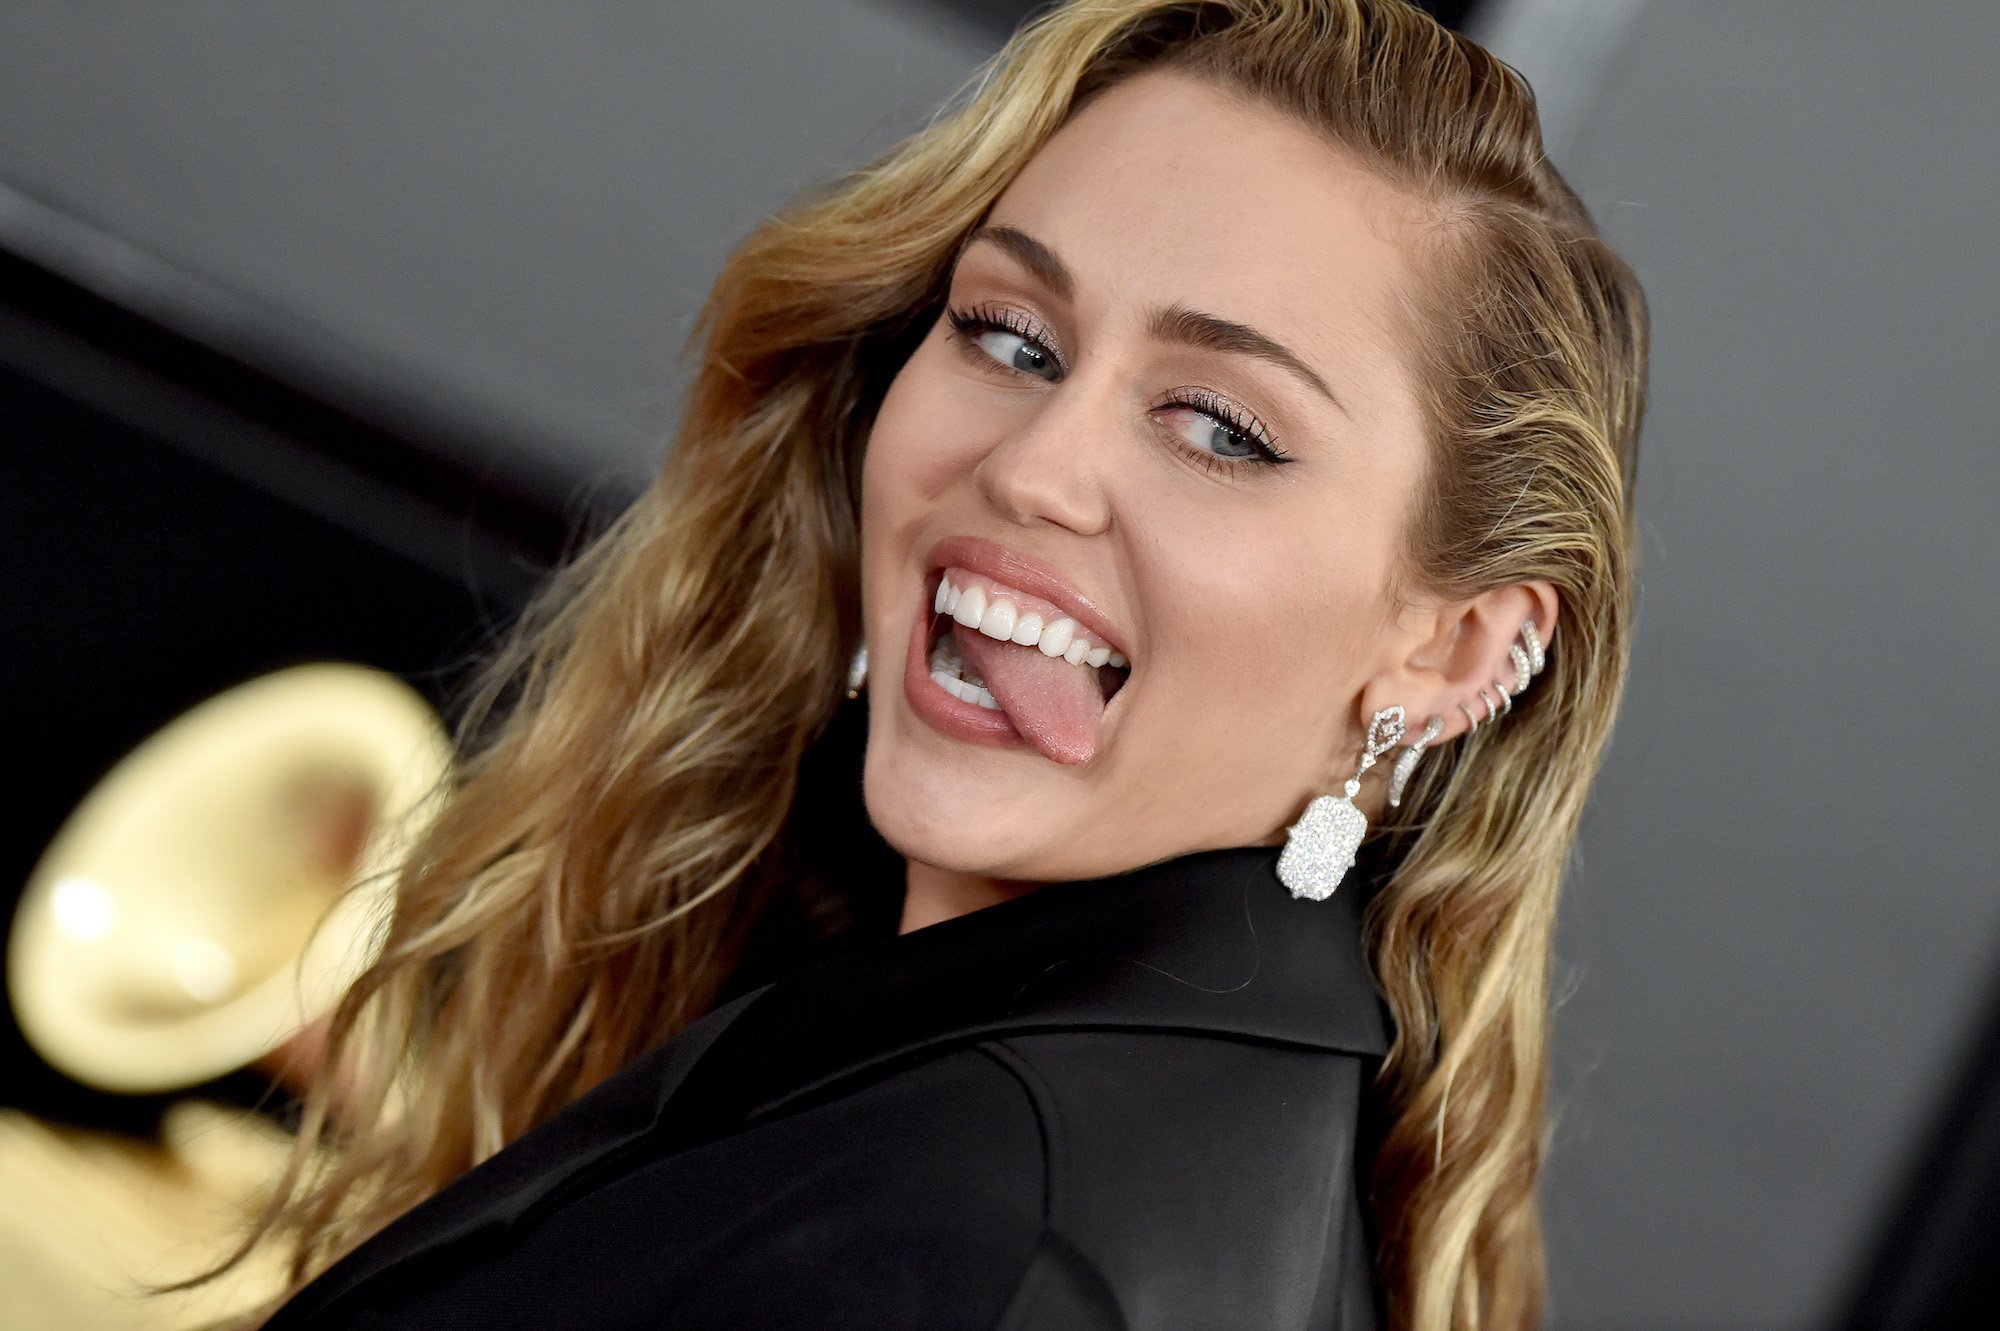 Miley Cyrus Insured Her Tongue for $1 Million After Her Infamous 2013 VMAs Performance